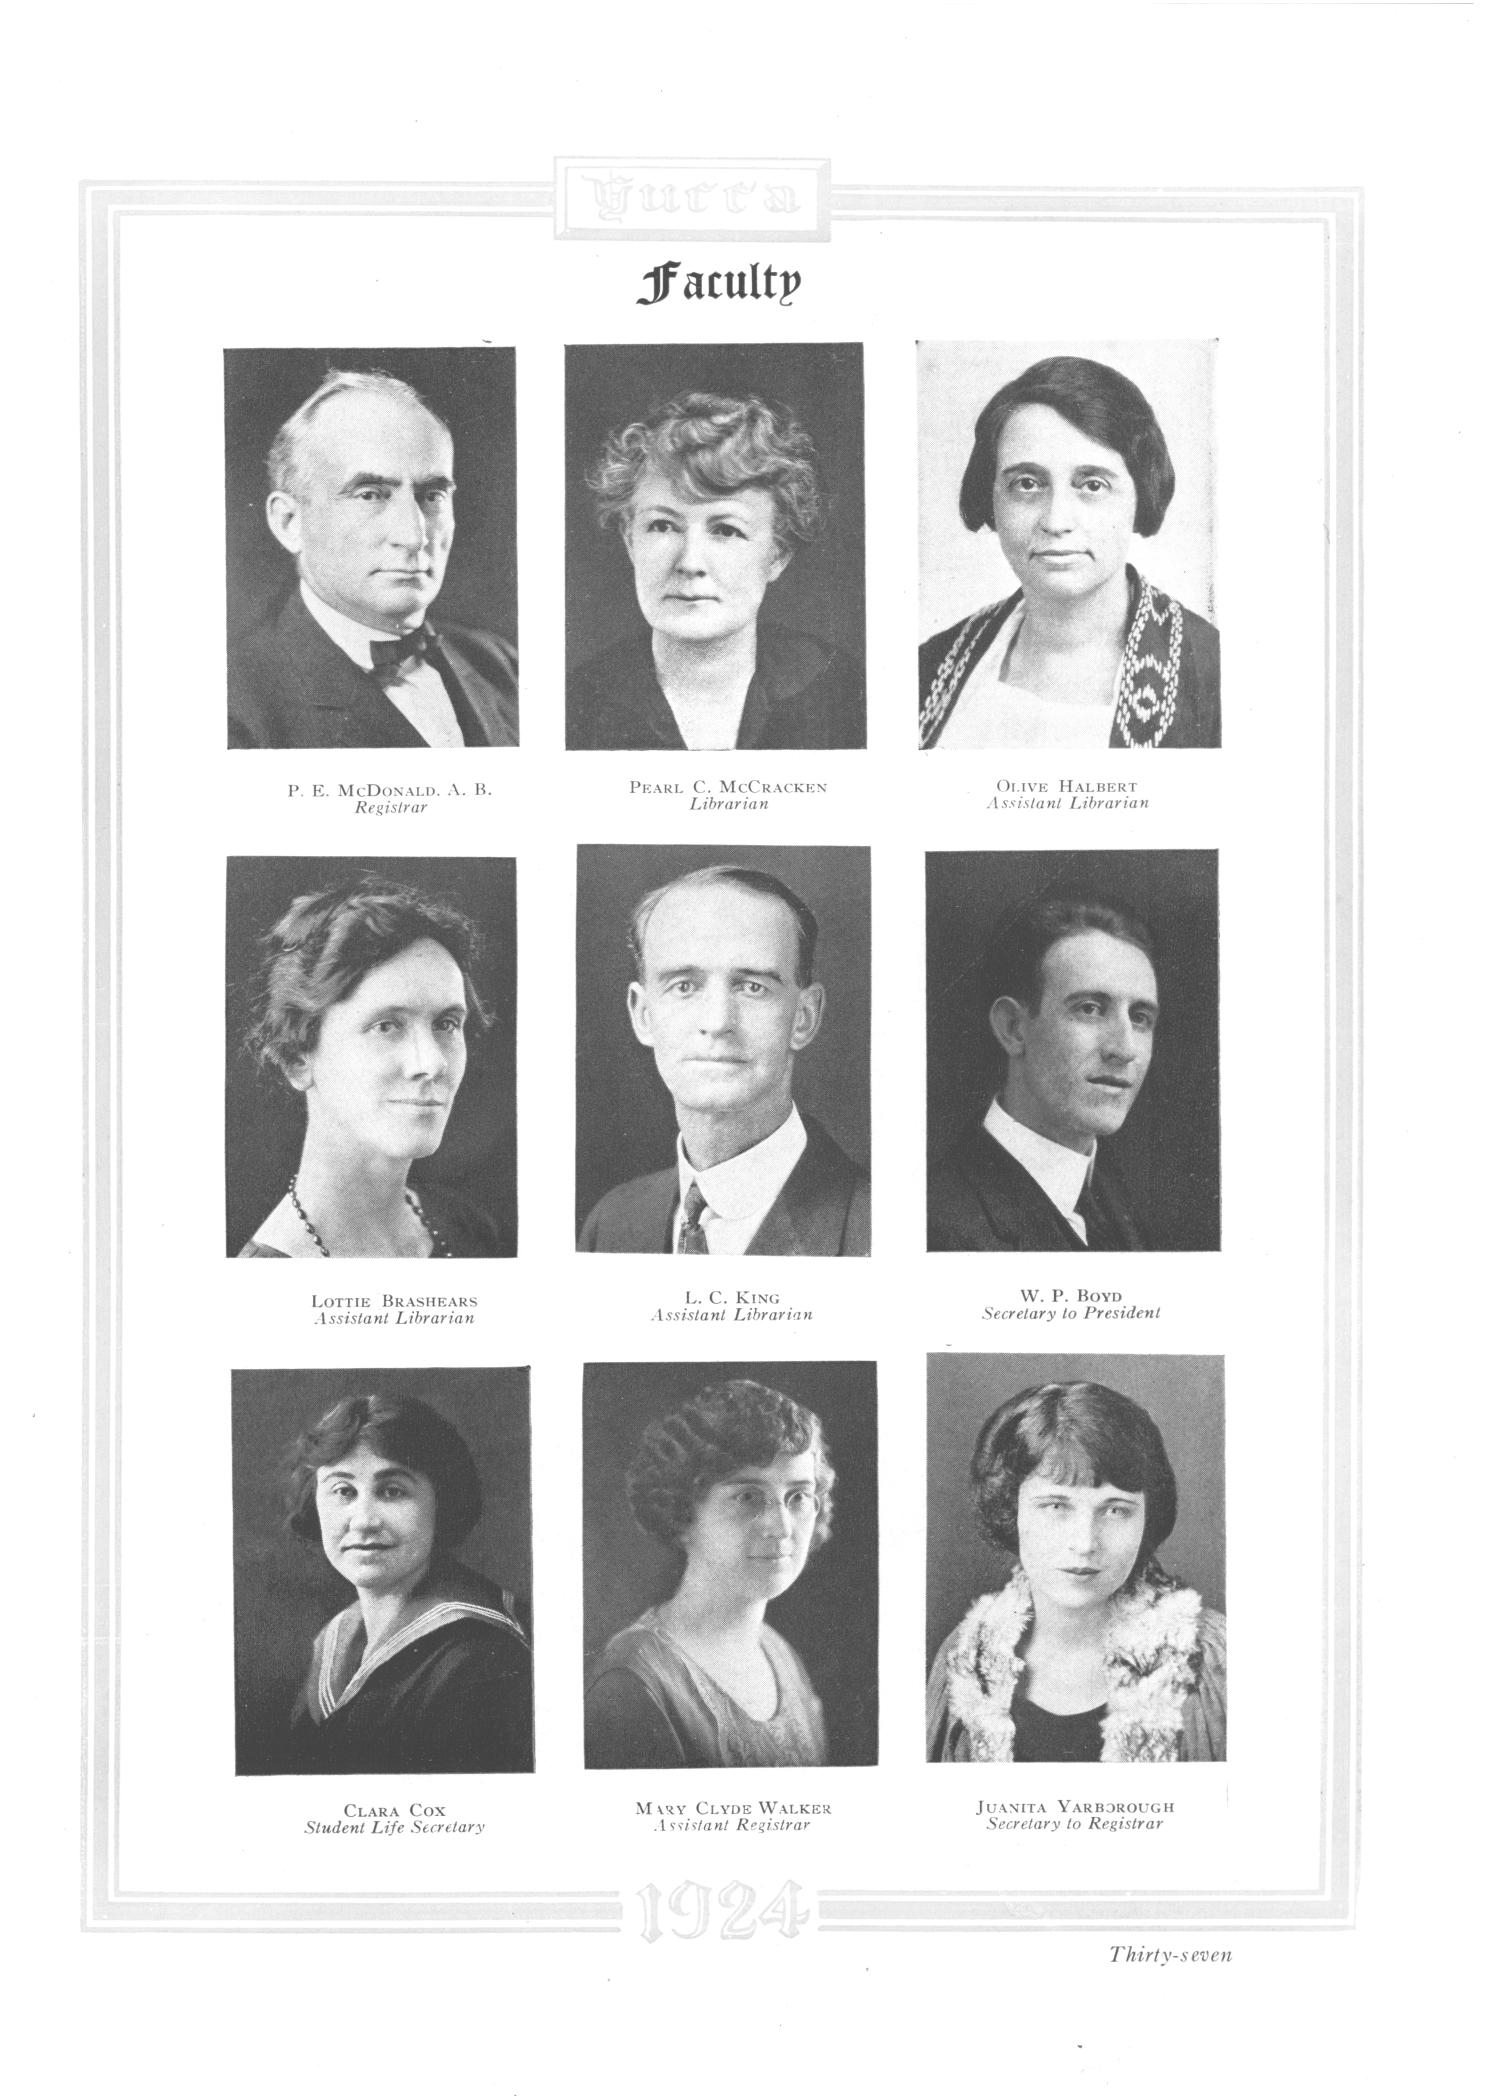 The Yucca, Yearbook of North Texas State Teacher's School, 1924
                                                
                                                    37
                                                